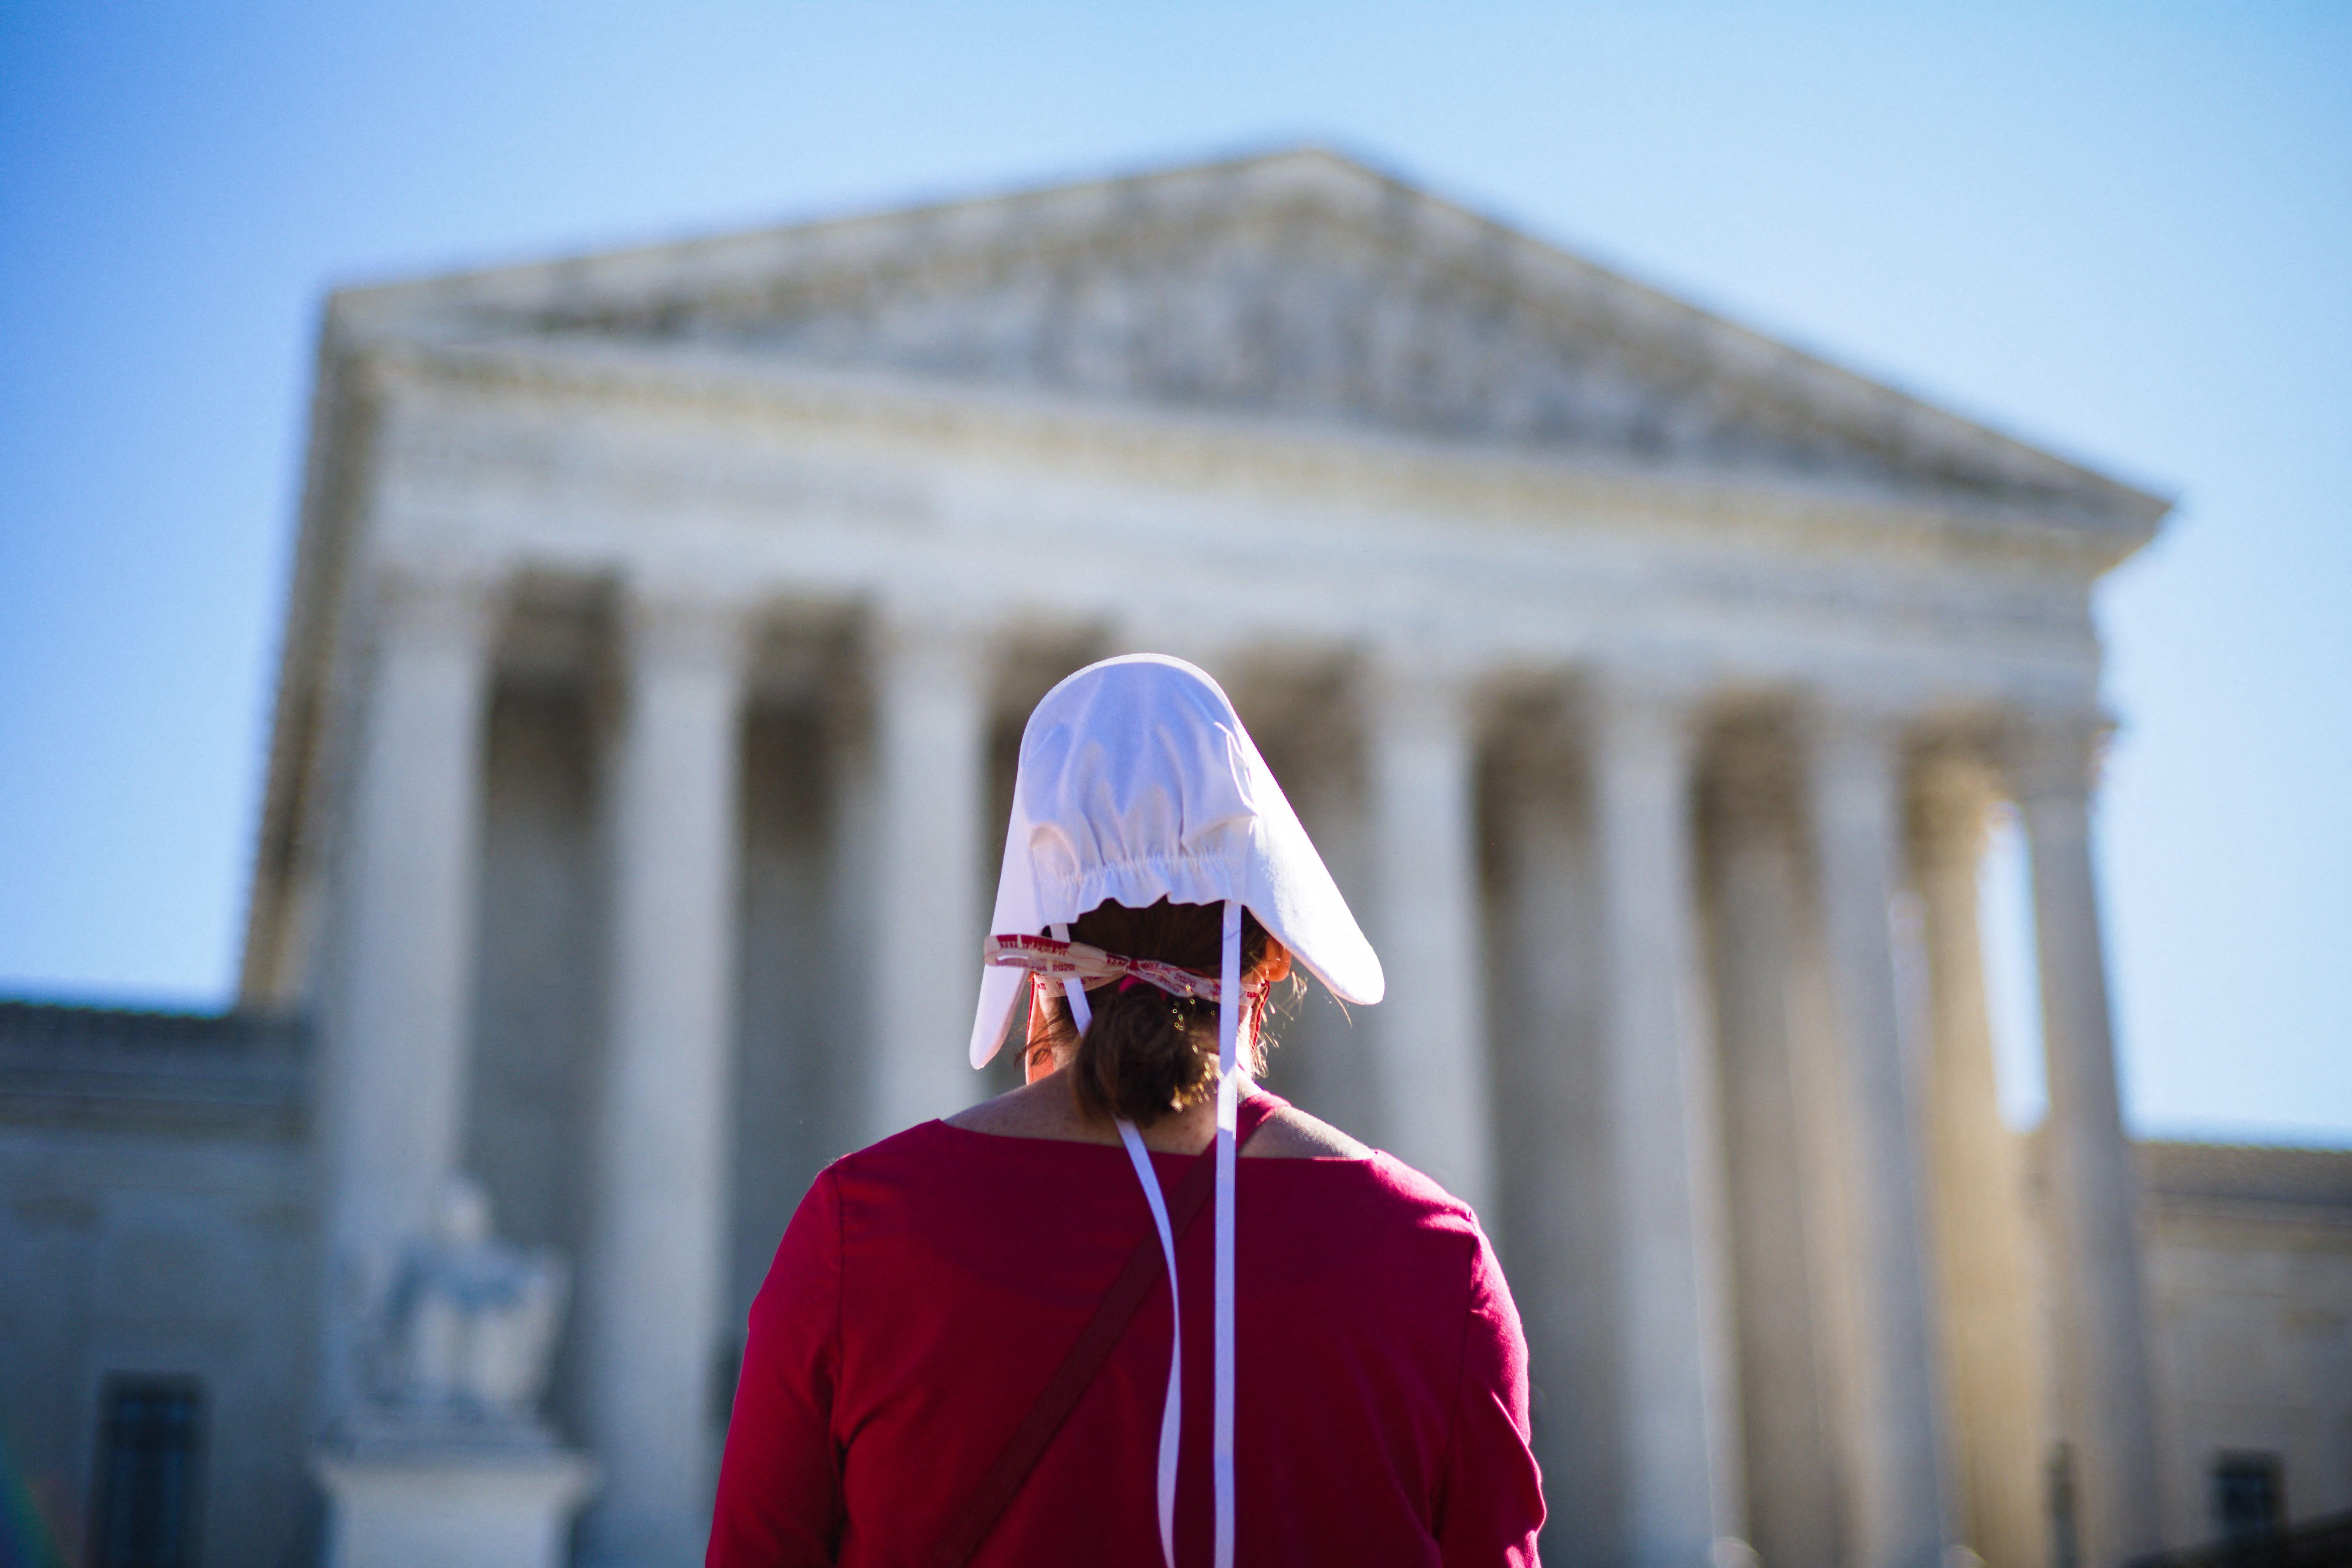 A pro-choice demonstrator dressed in Handmaid's Tale garb standing in front of the Supreme Court. 